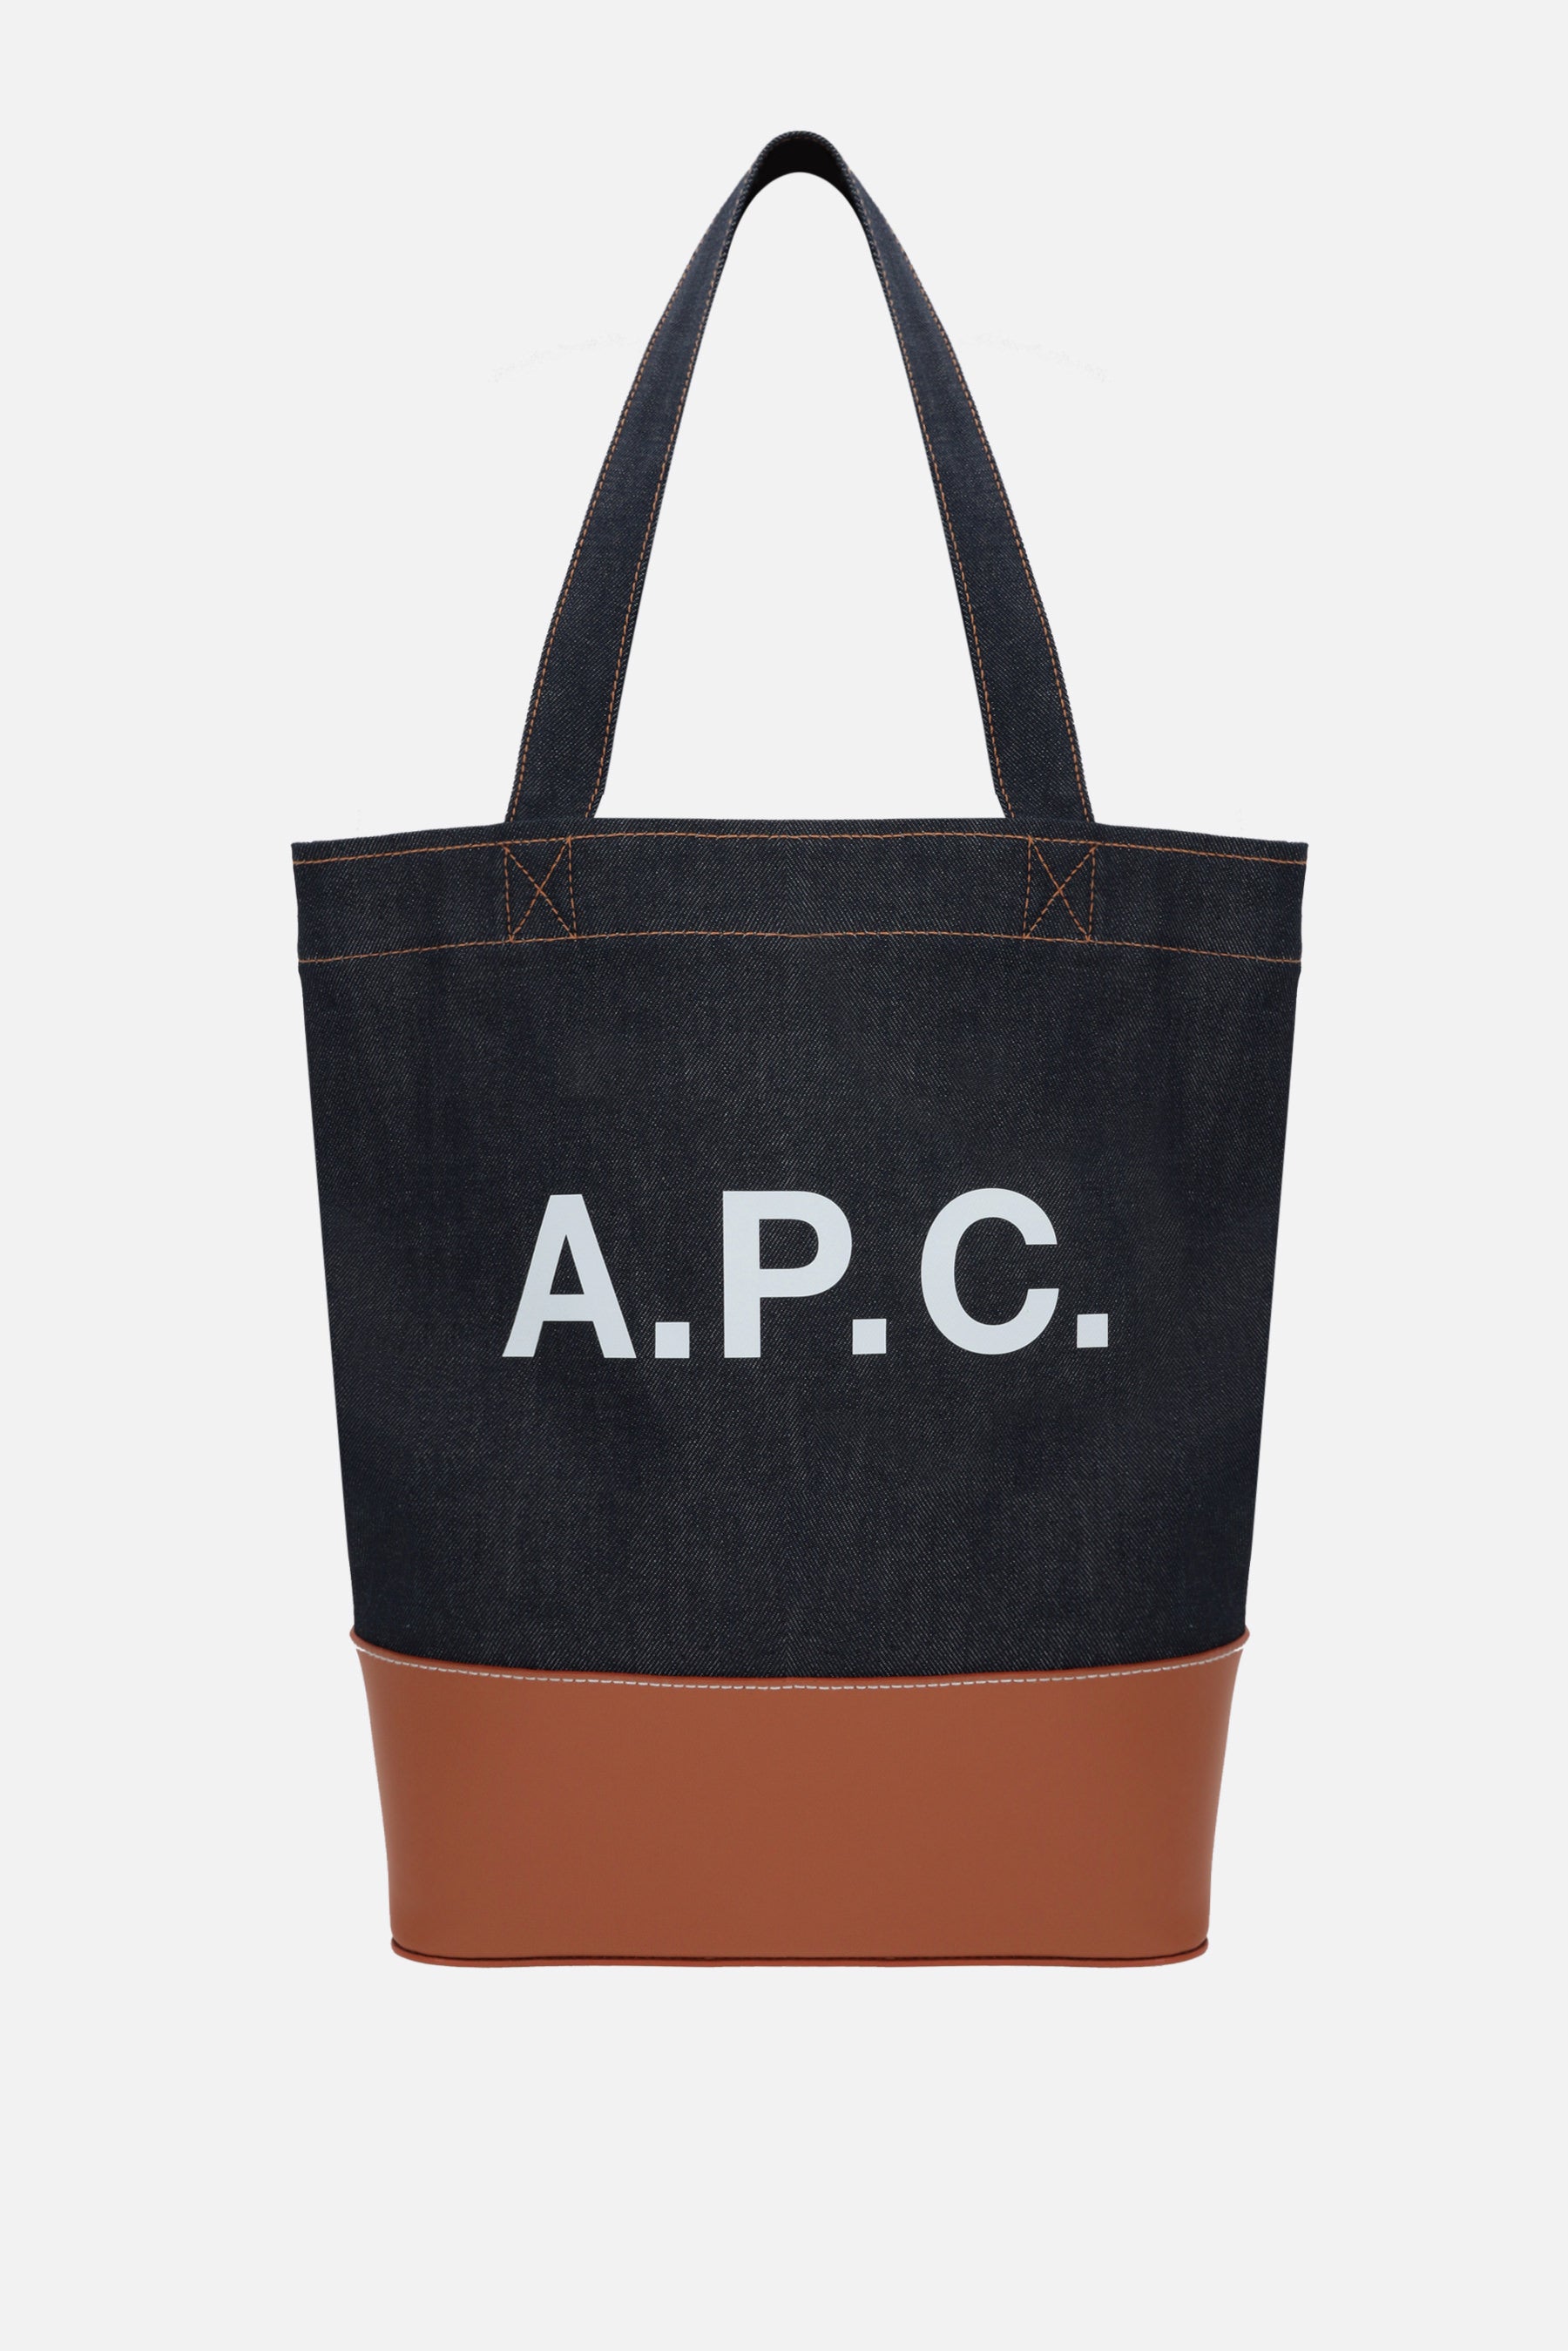 Axel denim and smooth leather tote bag